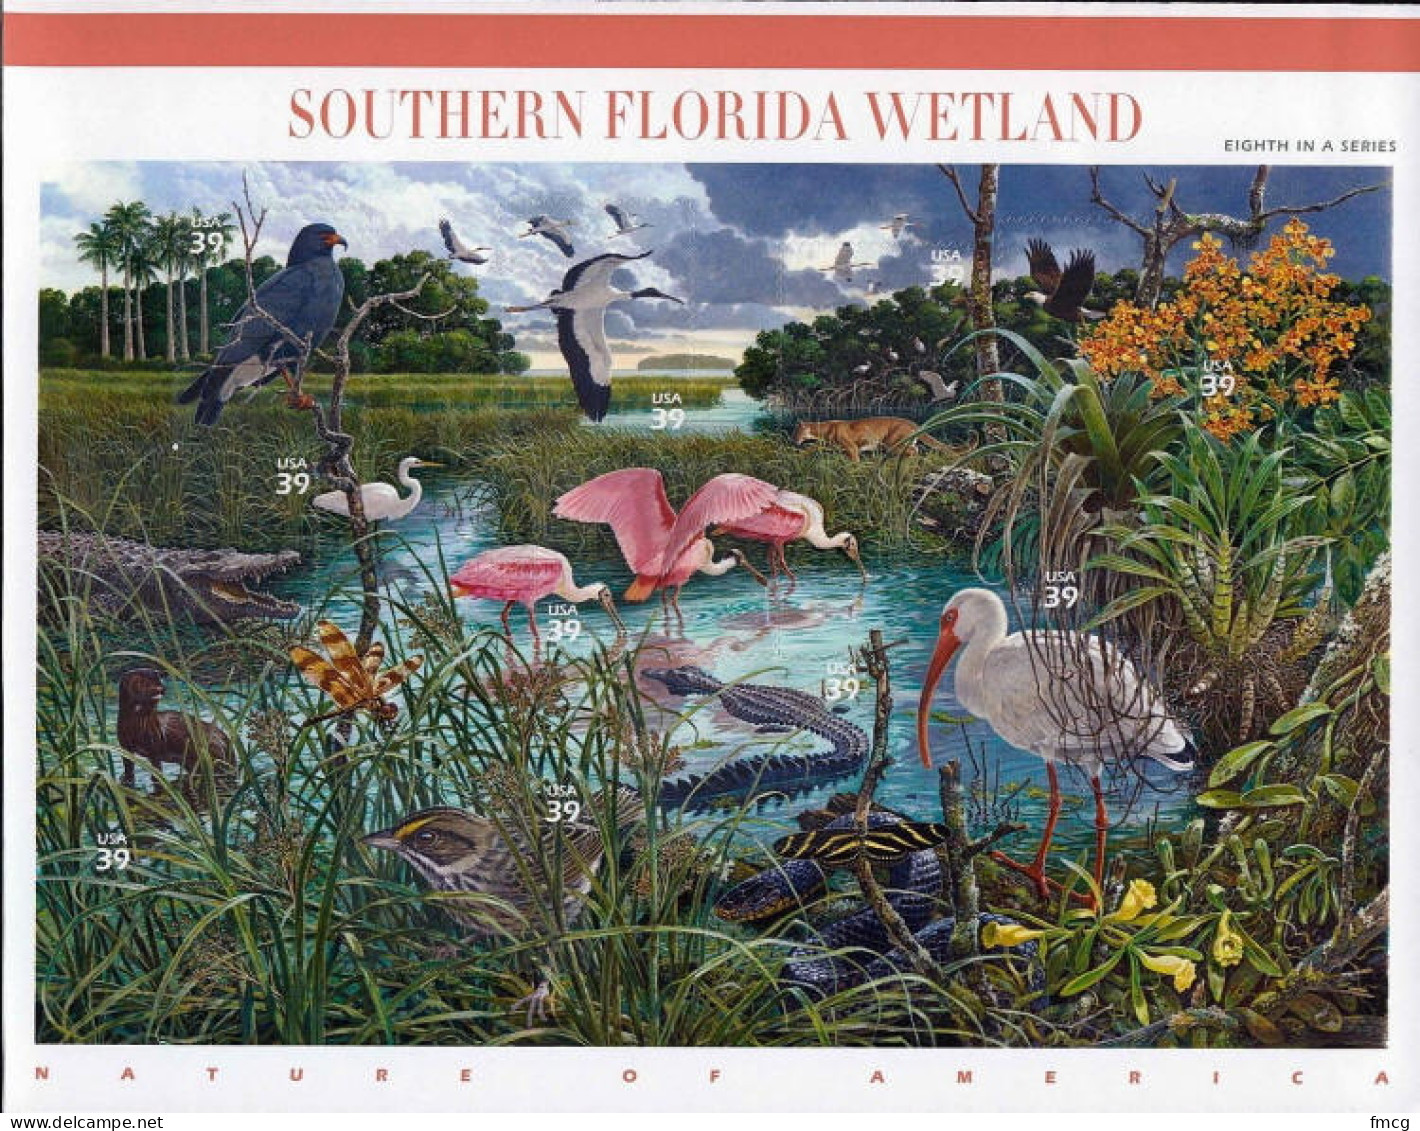 2006 Southern Florida Wetland, 10 Stamps, Mint Never Hinged - Ungebraucht